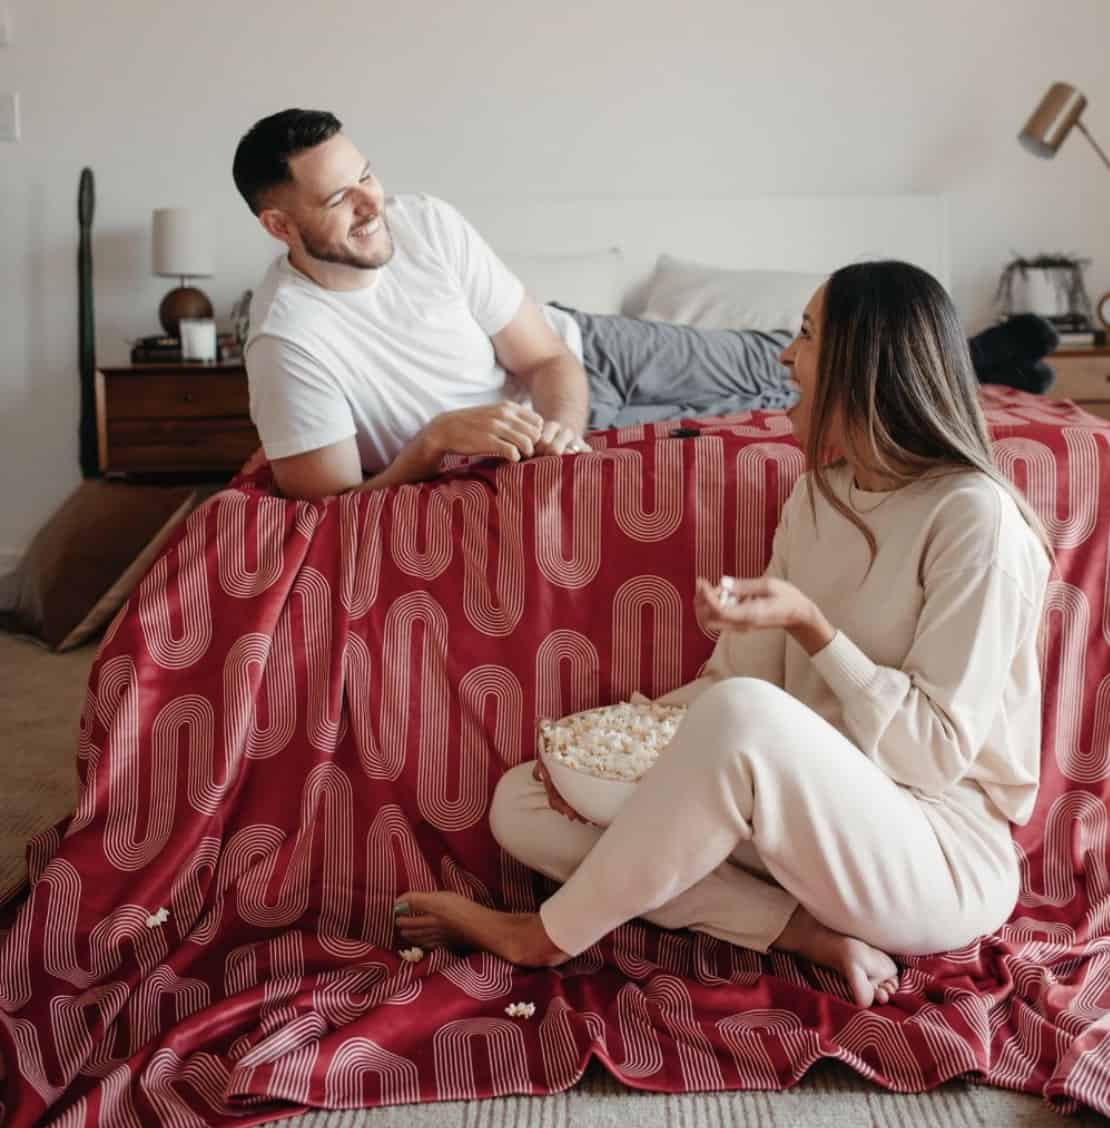 man laying on bed, women sitting on the ground eating popcorn, looking at each other